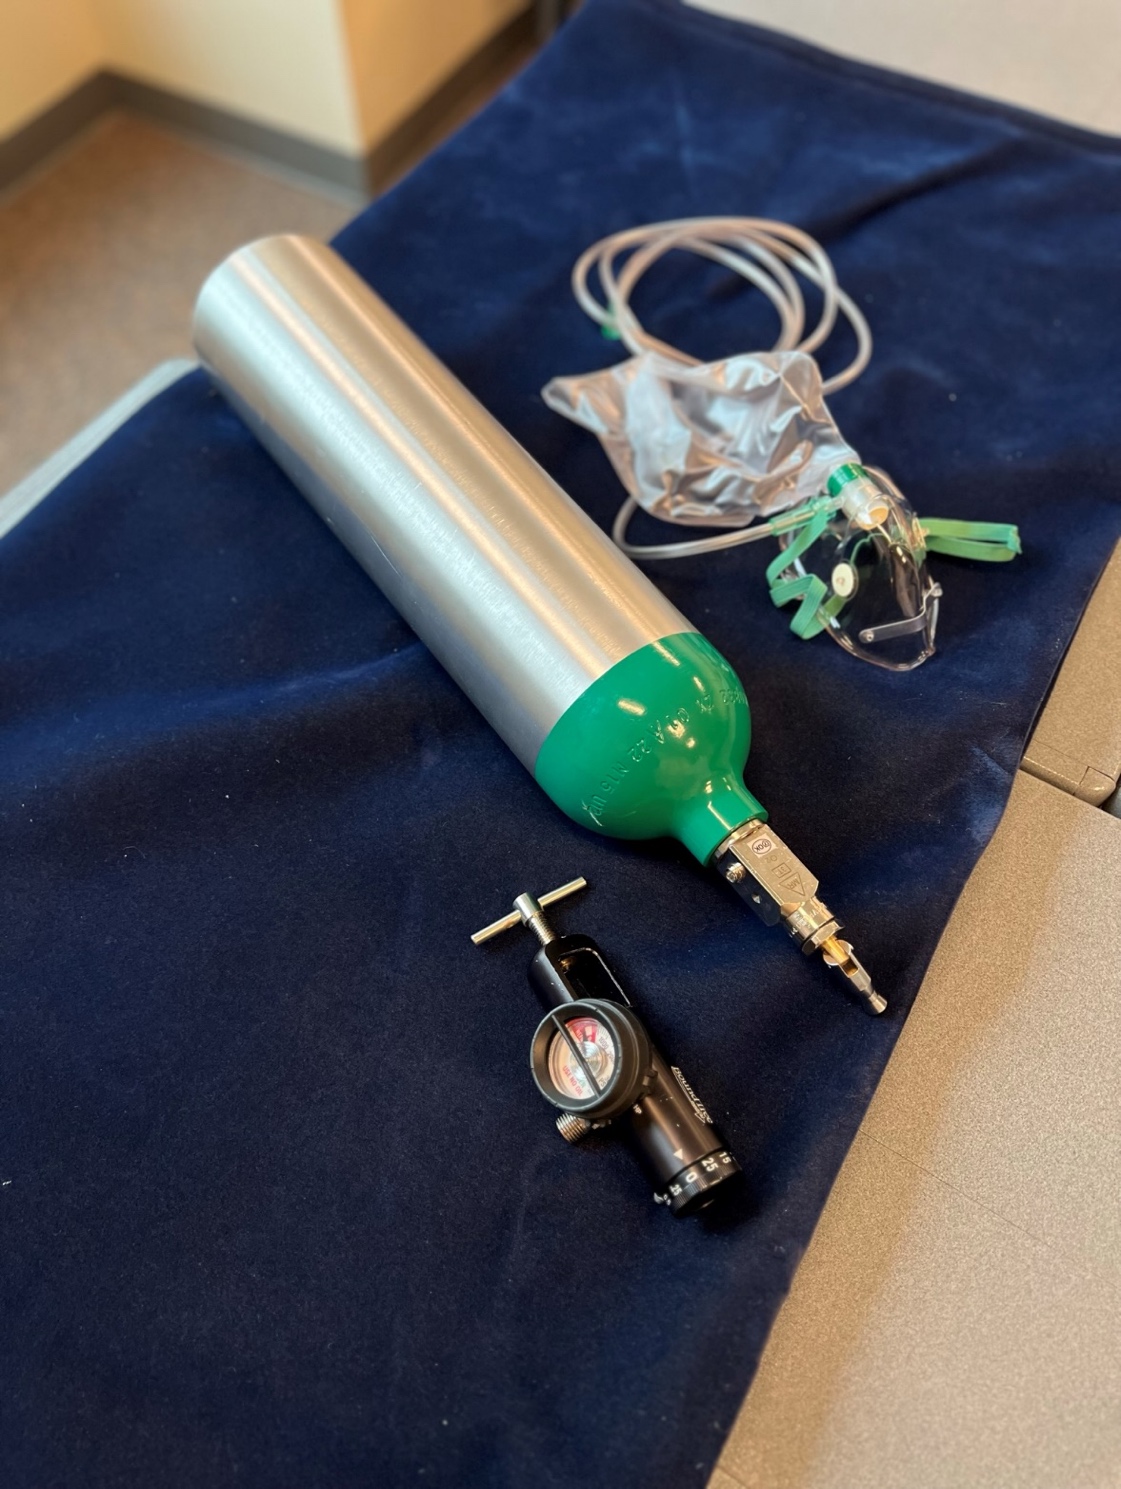 A photo of the equipment needed to deliver oxygen to a patient in the field via a non-rebreather mask, including a portable oxygen tank, an oxygen regulator, and an non-rebreather mask.